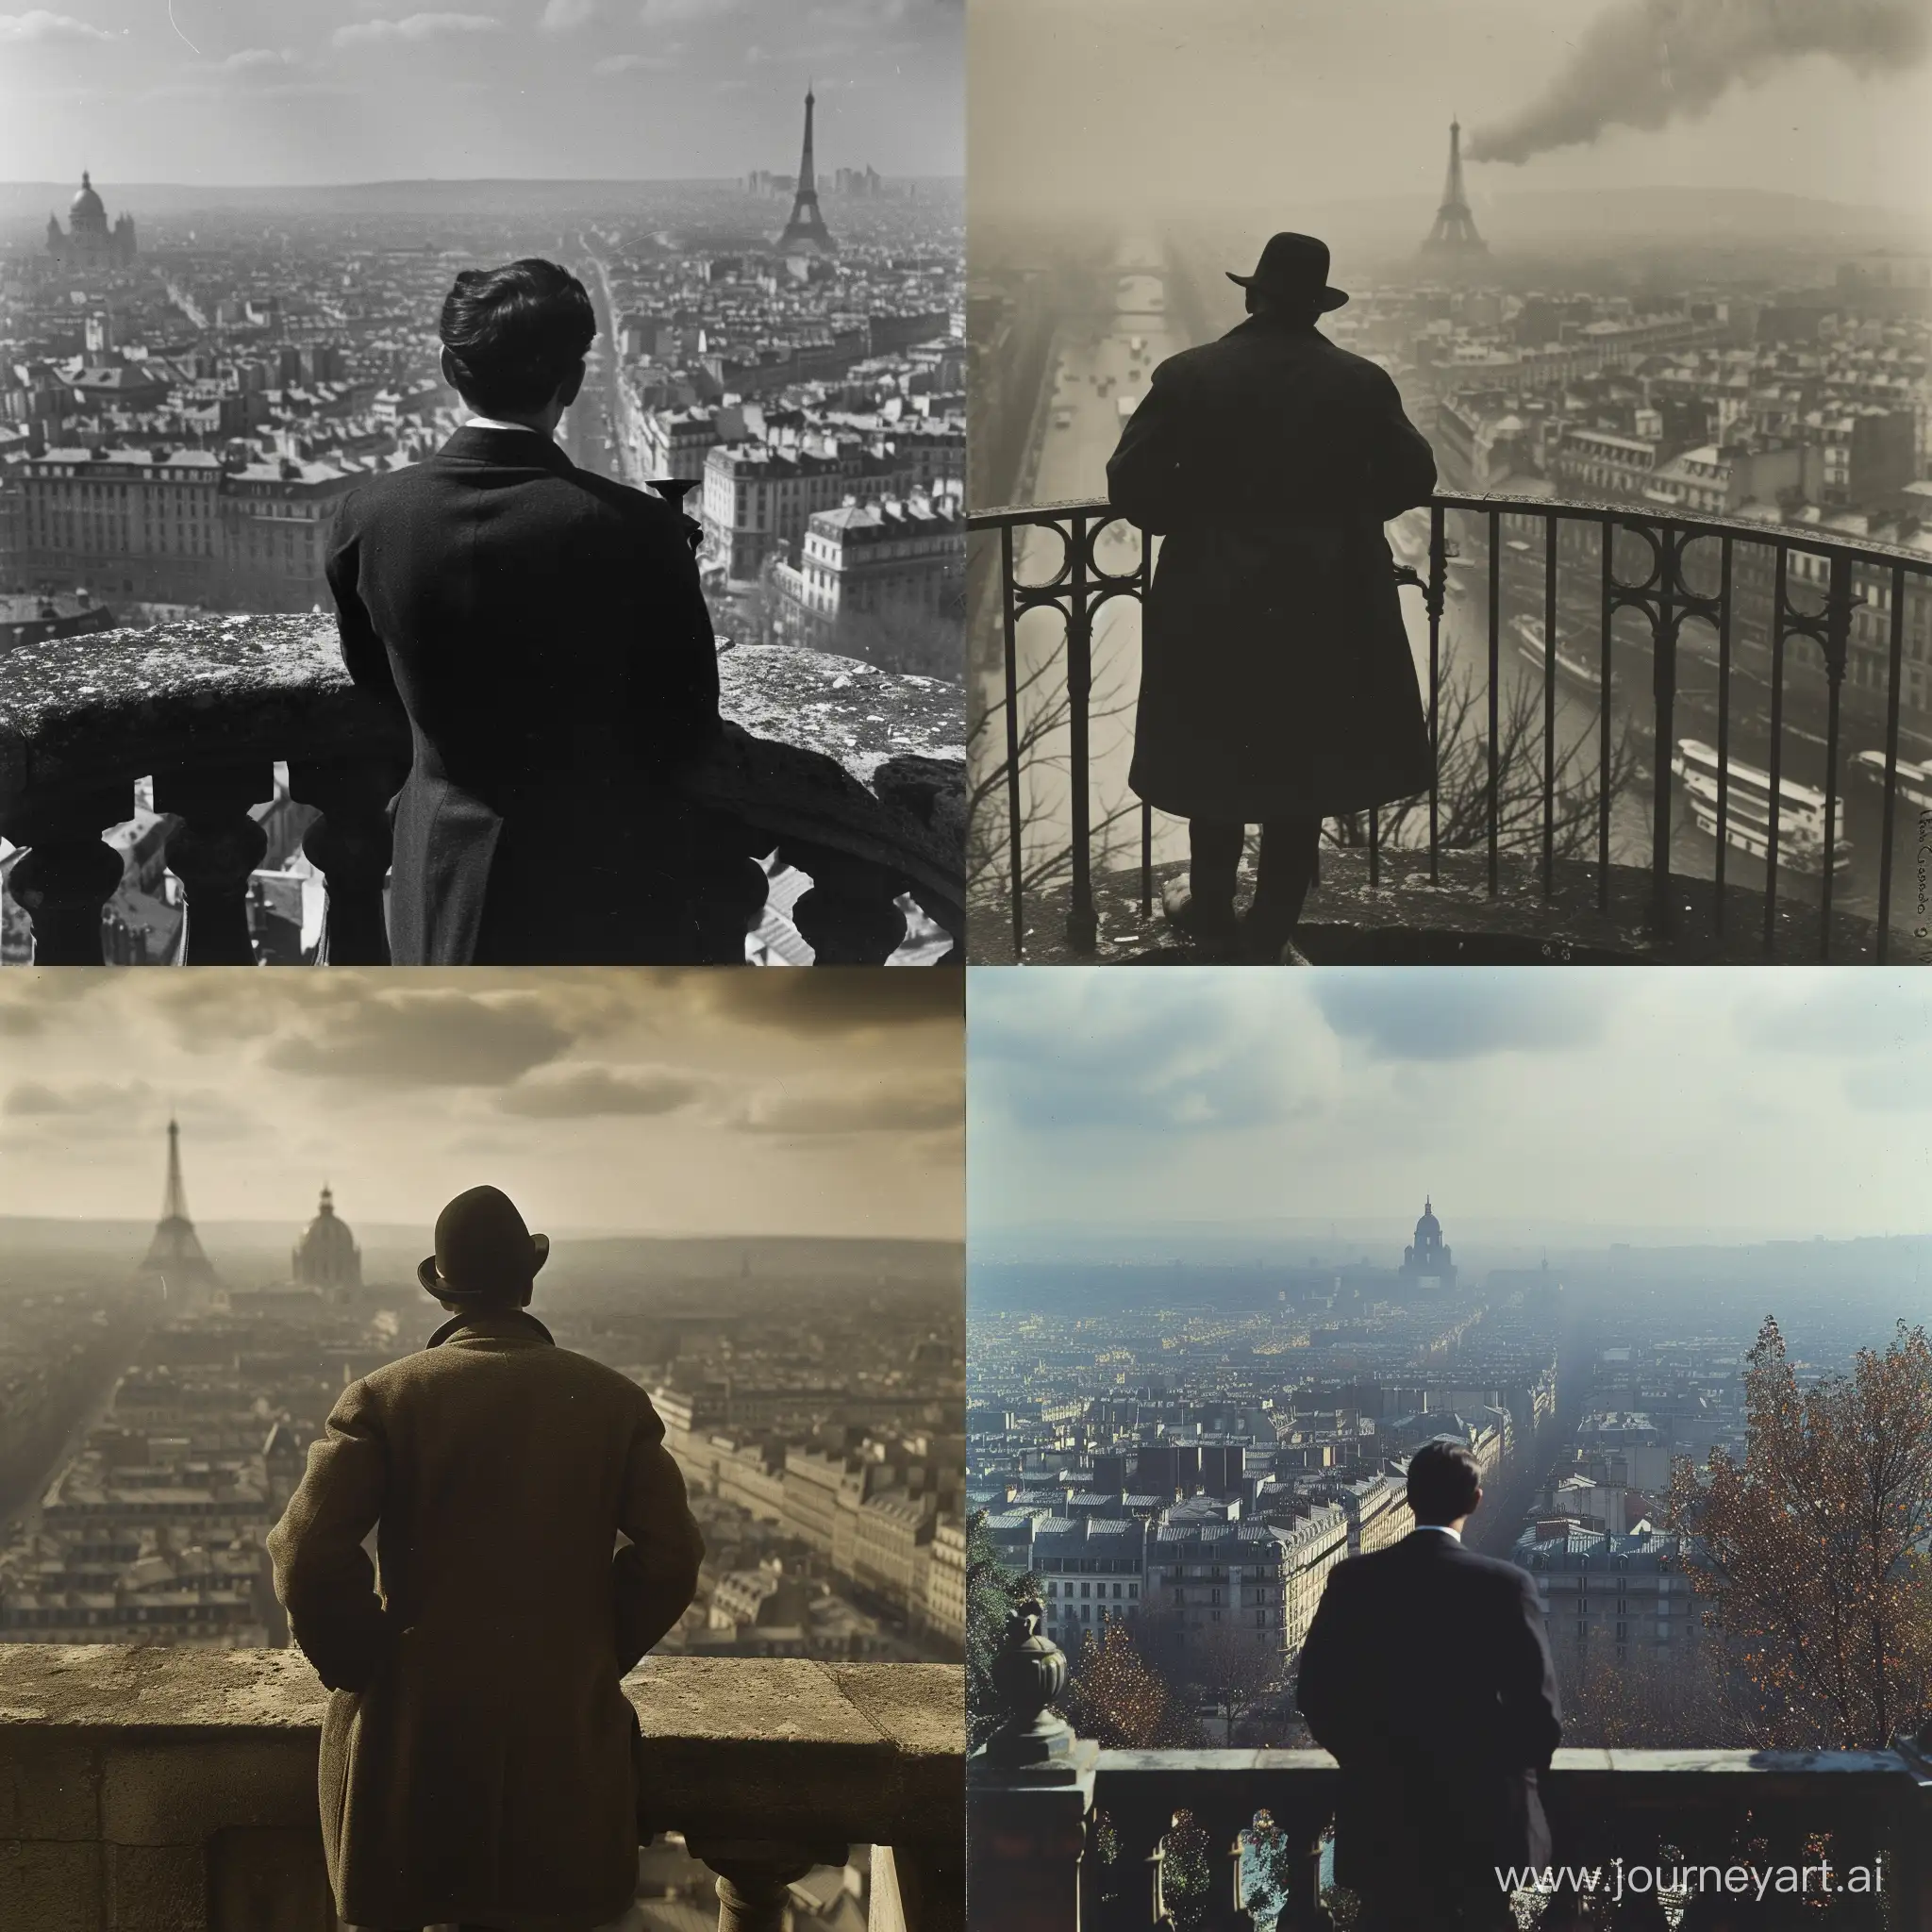 A French citizen looks at the landscape against the background of the city during the 30s.